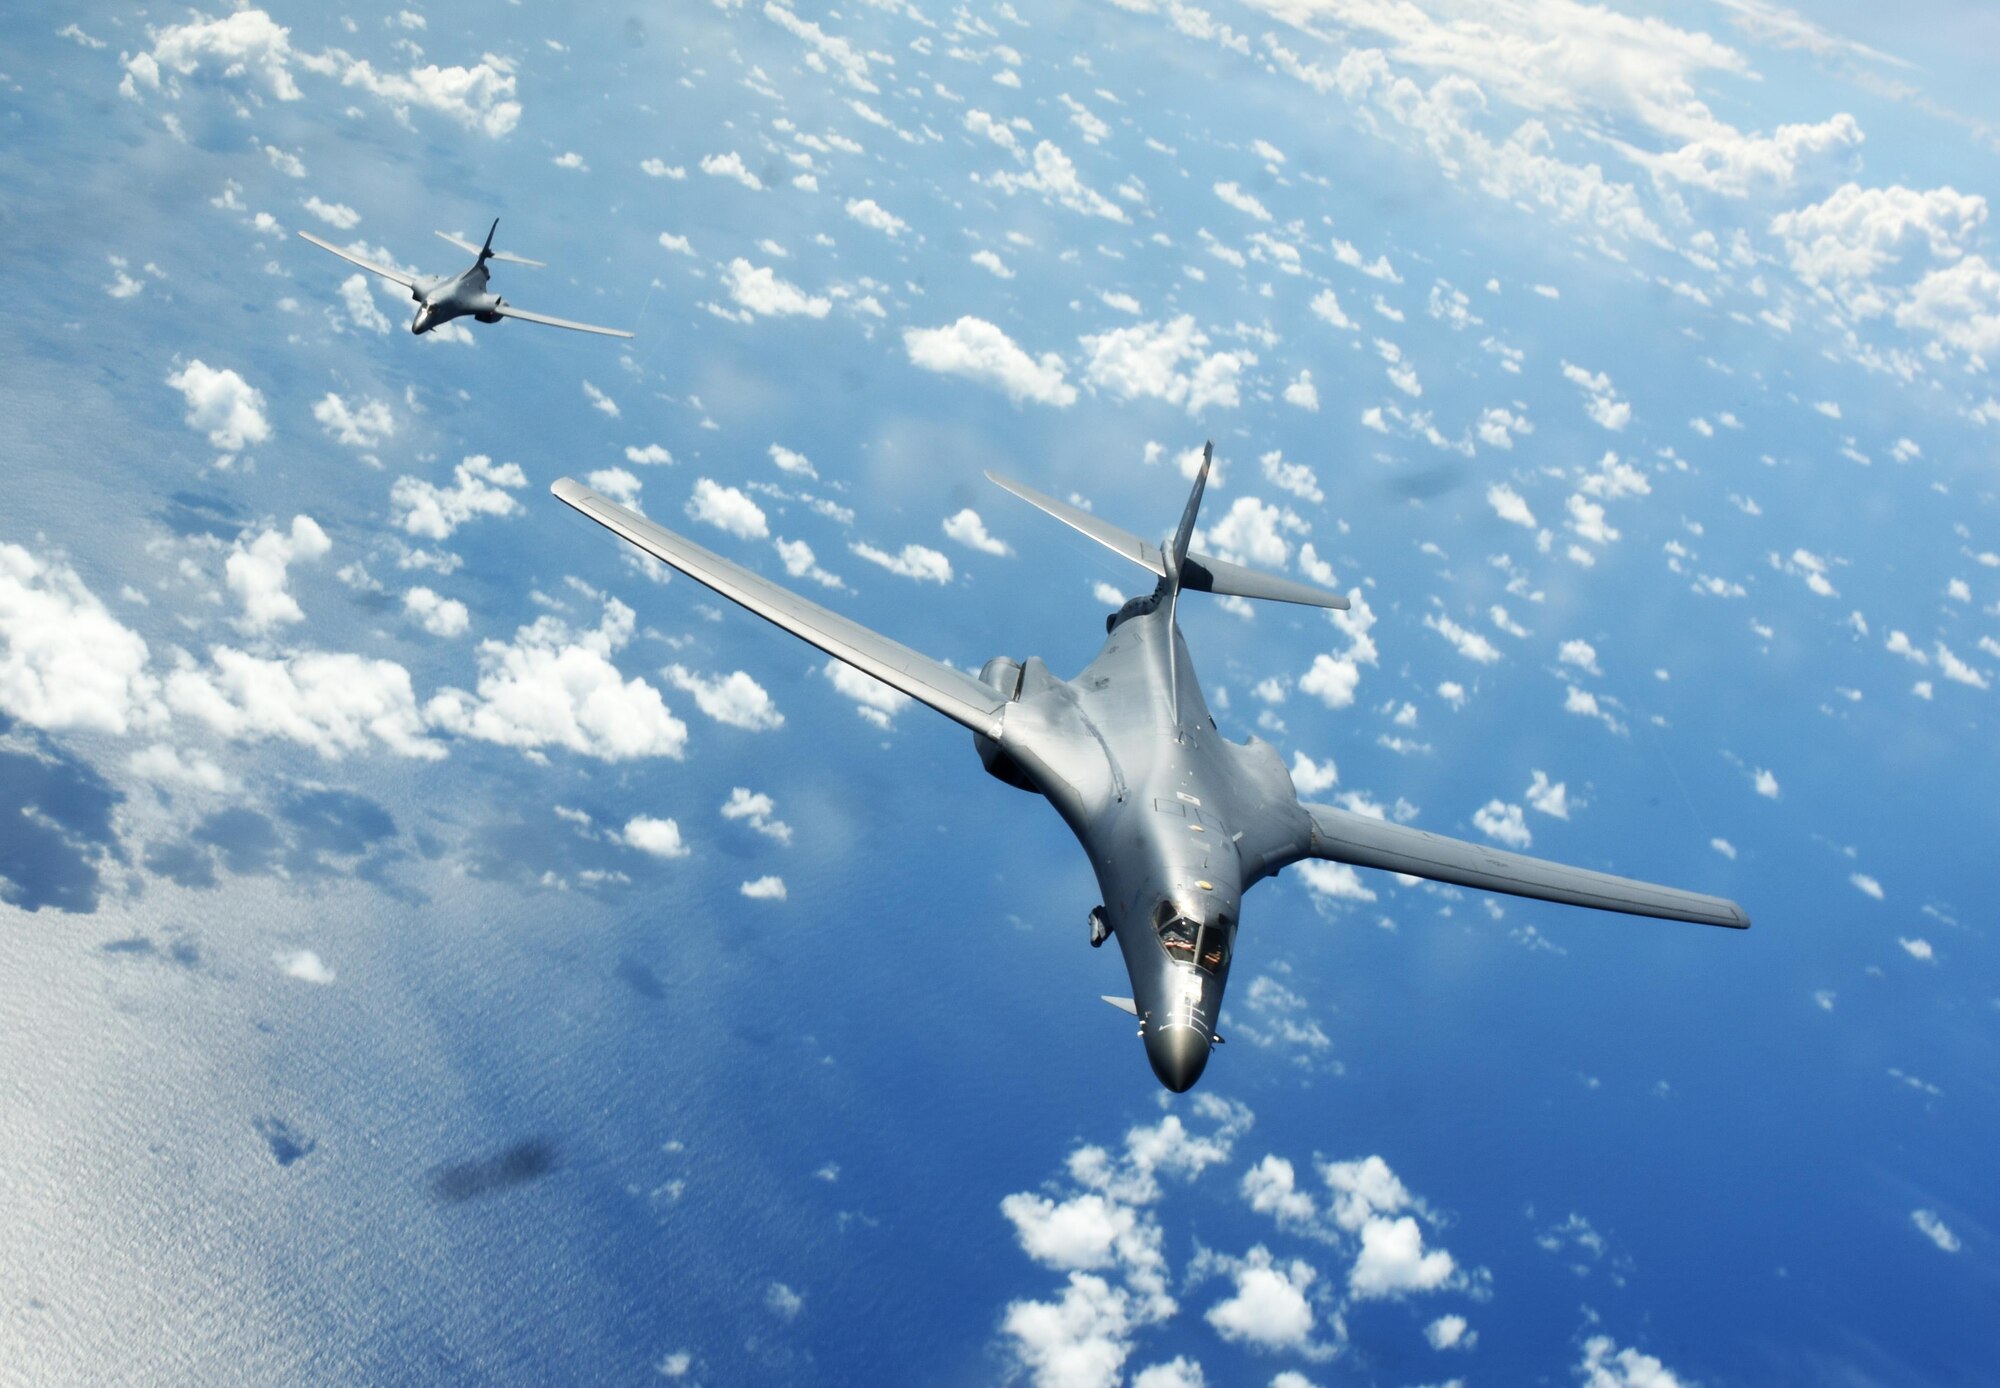 Two U.S. Air Force B-1B Lancers assigned to the 9th Expeditionary Bomb Squadron, deployed from Dyess Air Force Base, Texas, fly a 10-hour mission from Andersen Air Force Base, Guam, through the South China Sea, operating with the U.S. Navy's Arleigh Burke-class guided-missile destroyer USS Sterett (DDG 104), June 8, 2017. The joint training, organized under Pacific Command's continuous bomber presence program (CBP), allows the Air Force and Navy to increase interoperability by refining joint tactics, techniques and procedures while simultaneously strengthening their ability to seamlessly integrate their operations. (U.S. Air Force photo/Tech. Sgt. Richard P. Ebensberger)